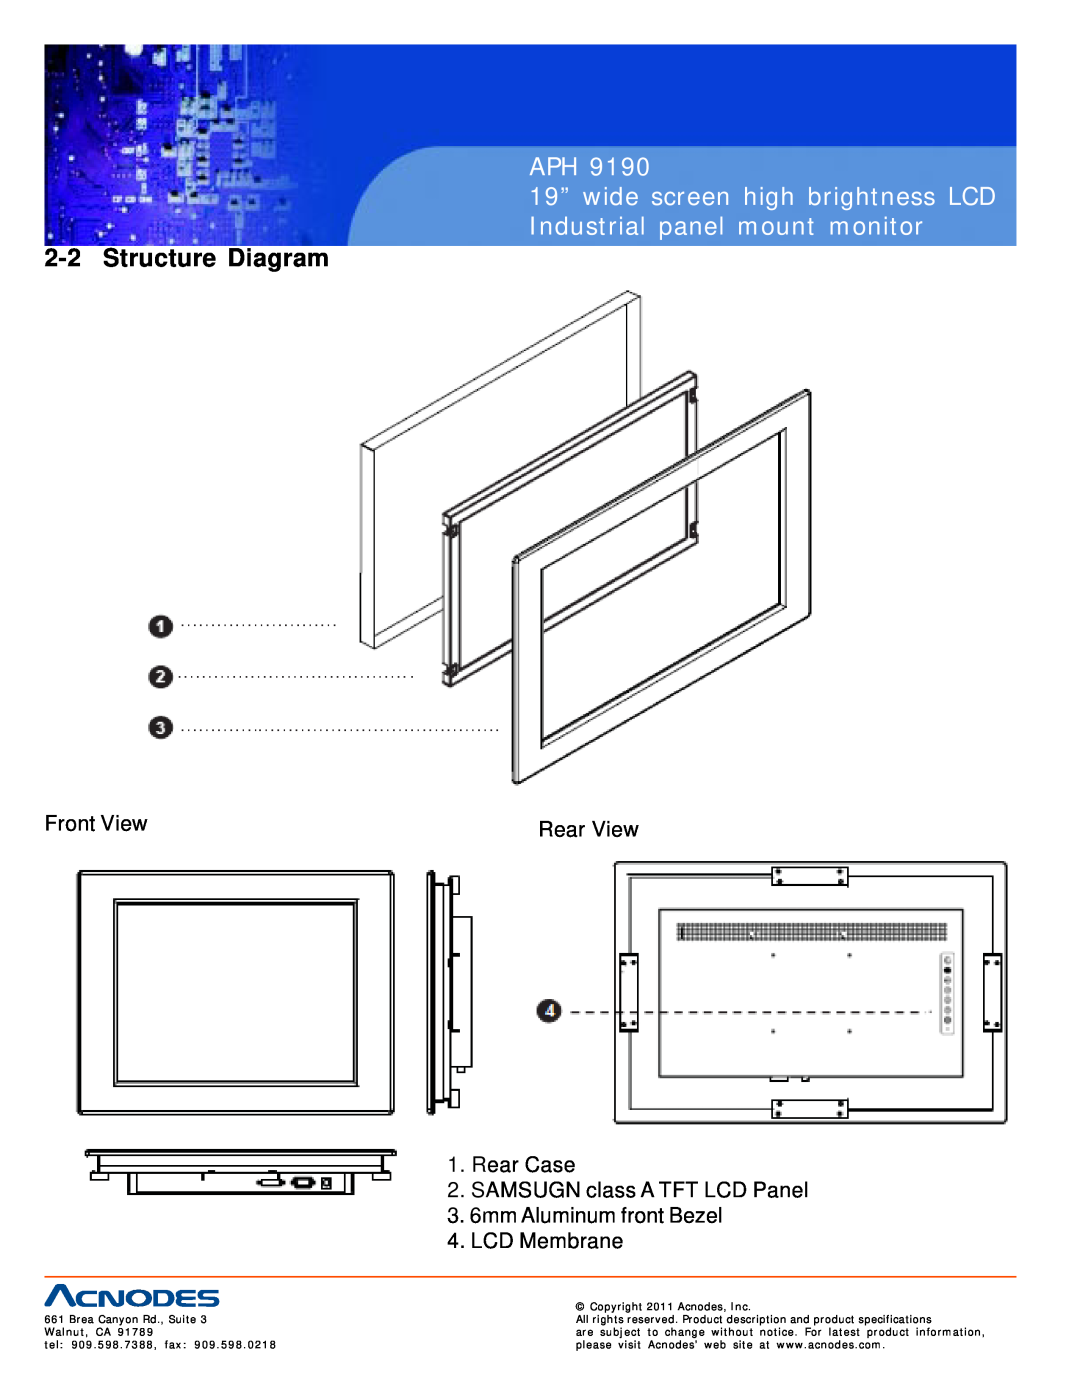 Acnodes APH 9190 Structure Diagram, 19” wide screen high brightness LCD Industrial panel mount monitor, Front View 